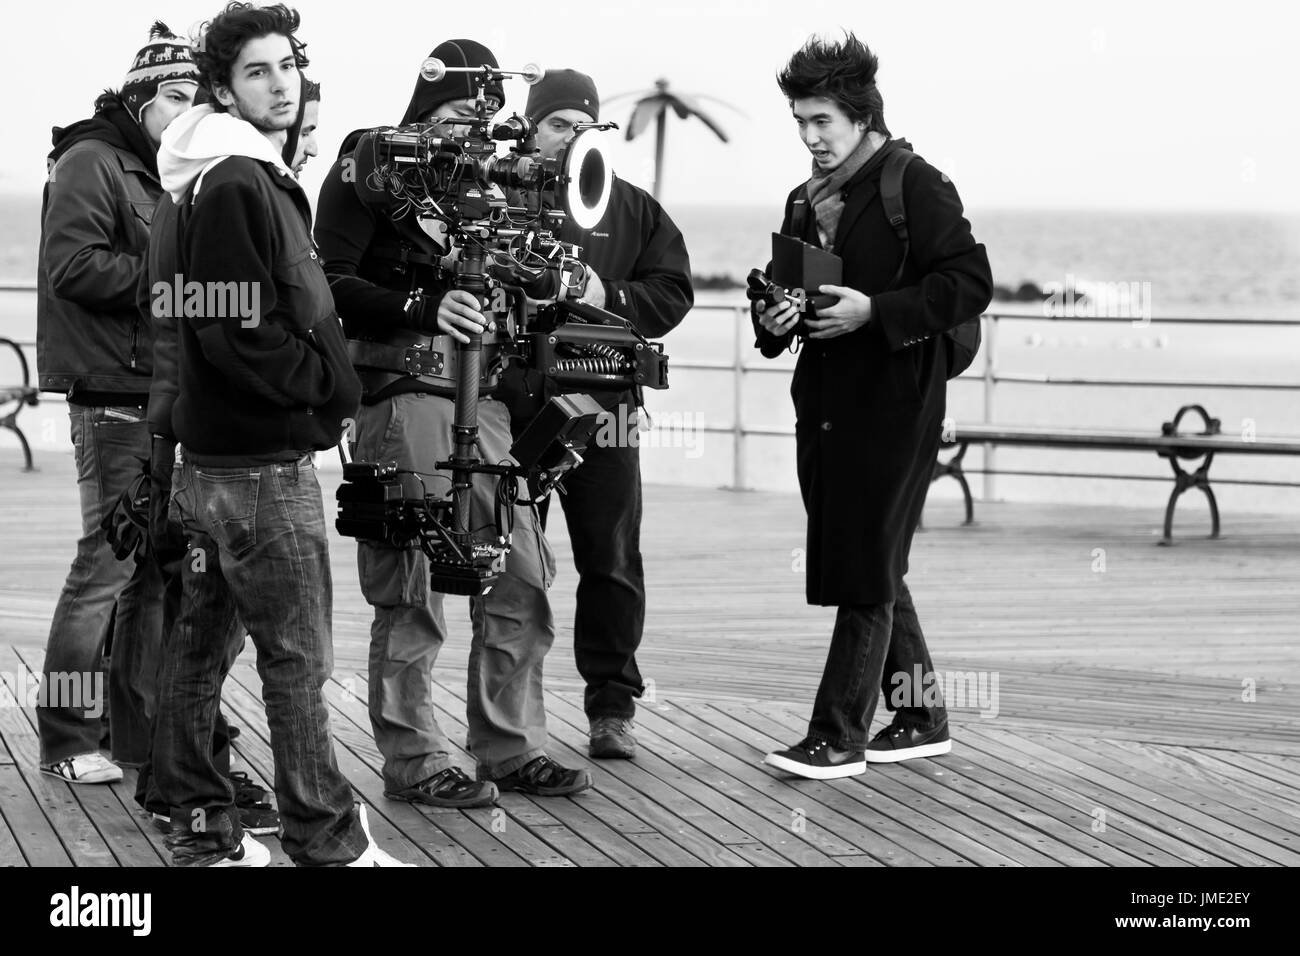 NEW YORK CITY-NOV 2010: A film crew working on location at the Coney Island boardwalk. Black and white image. Stock Photo